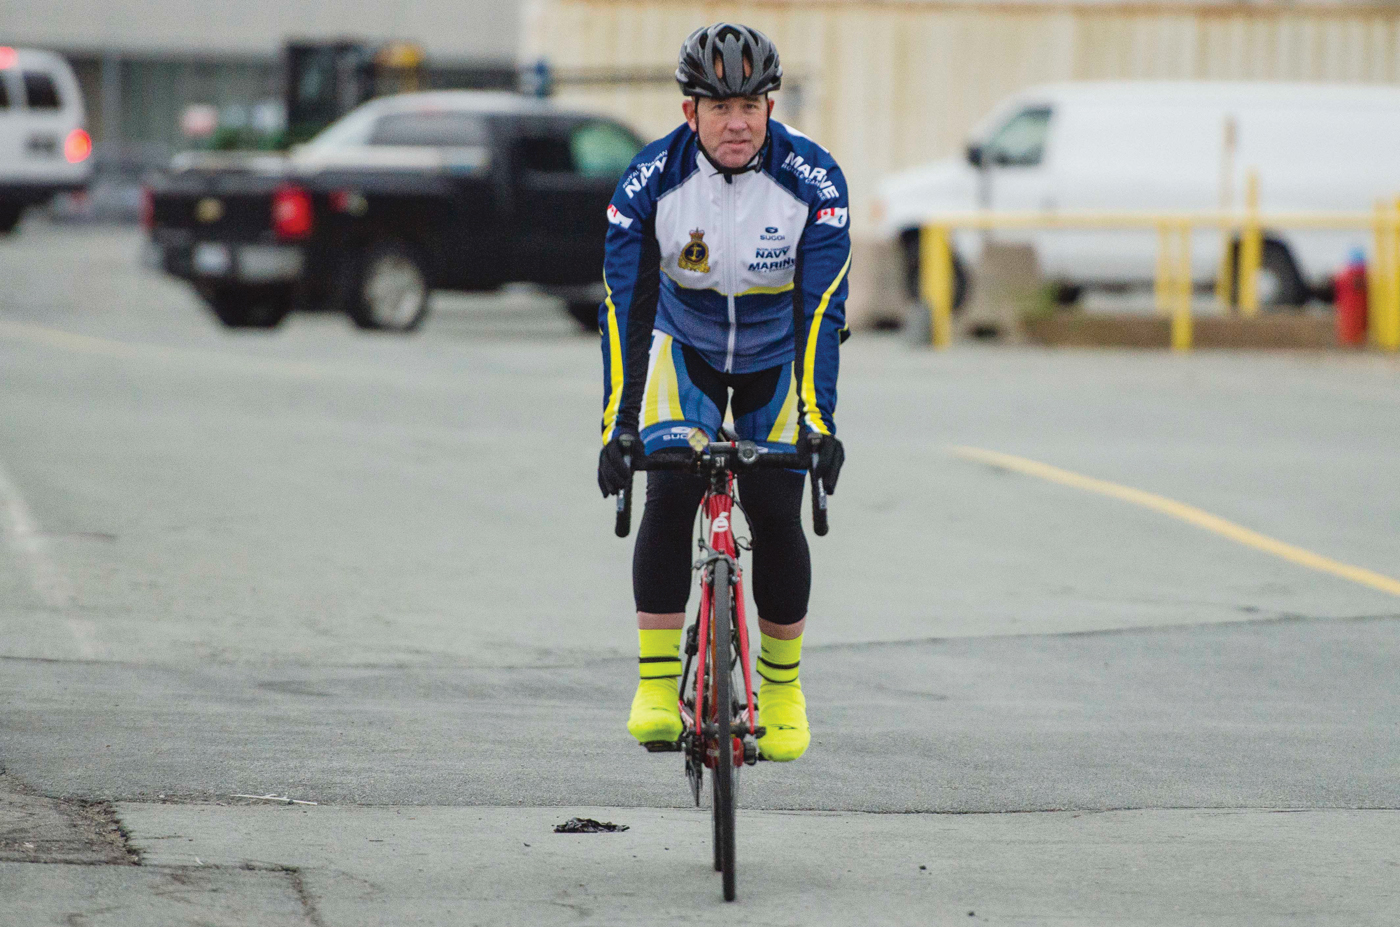 LCdr Kray Robichaud is a long-distance cyclist who has achieved the ‘super randonneur’ title every year since 2016 — completing a series of self-supported rides ranging from 200 to 600 kilometres. He is participating in this year’s Navy Bike Ride Harry DeWolf challenge.